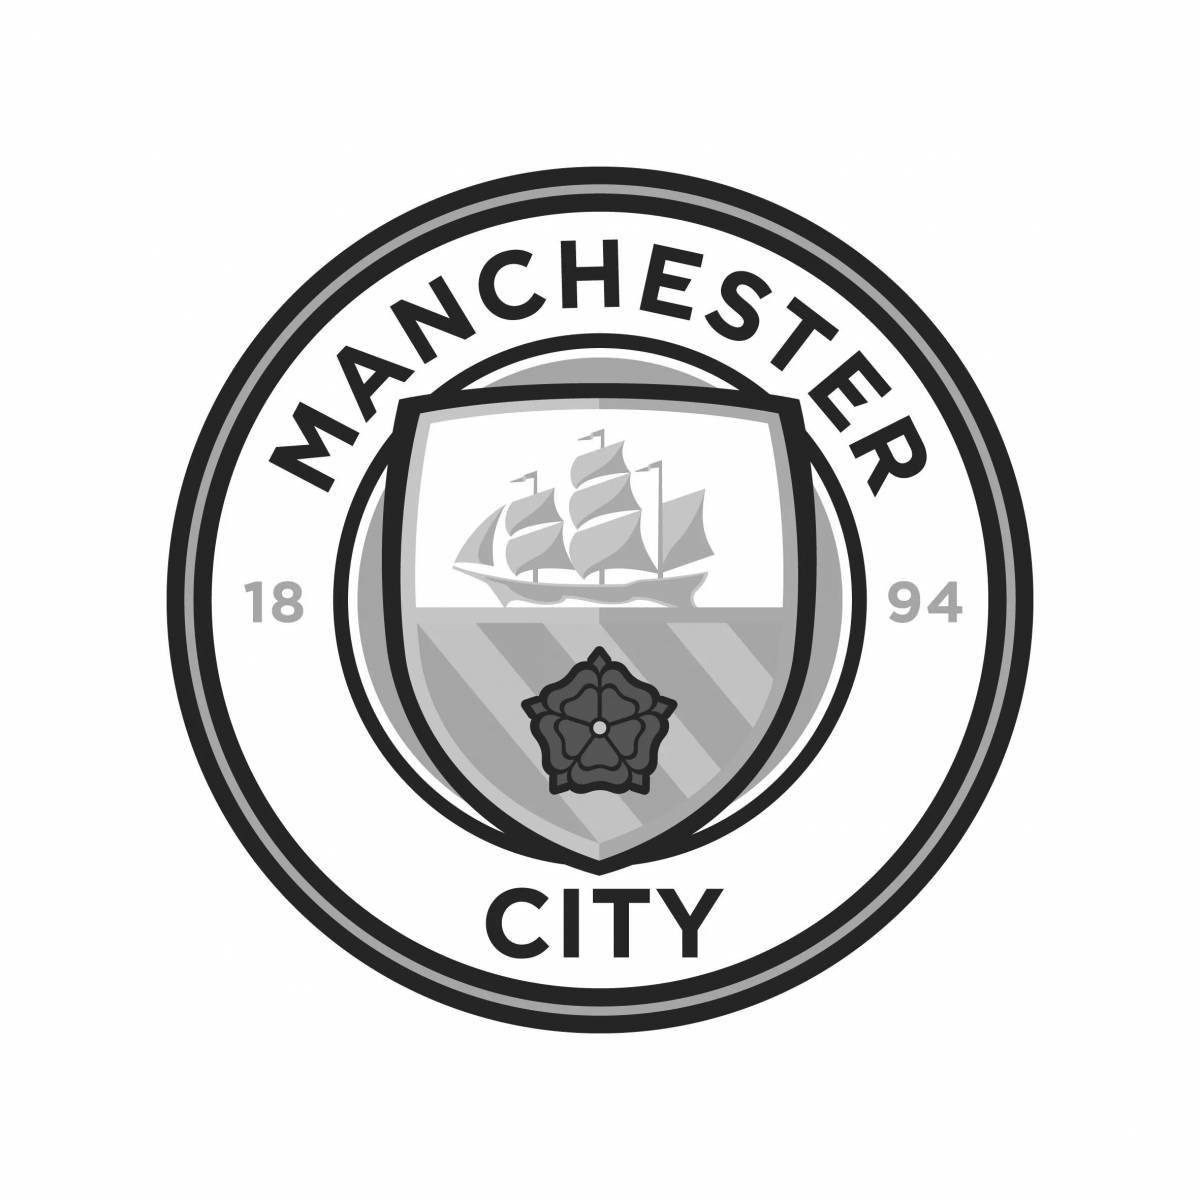 Coloring book flourishing manchester city